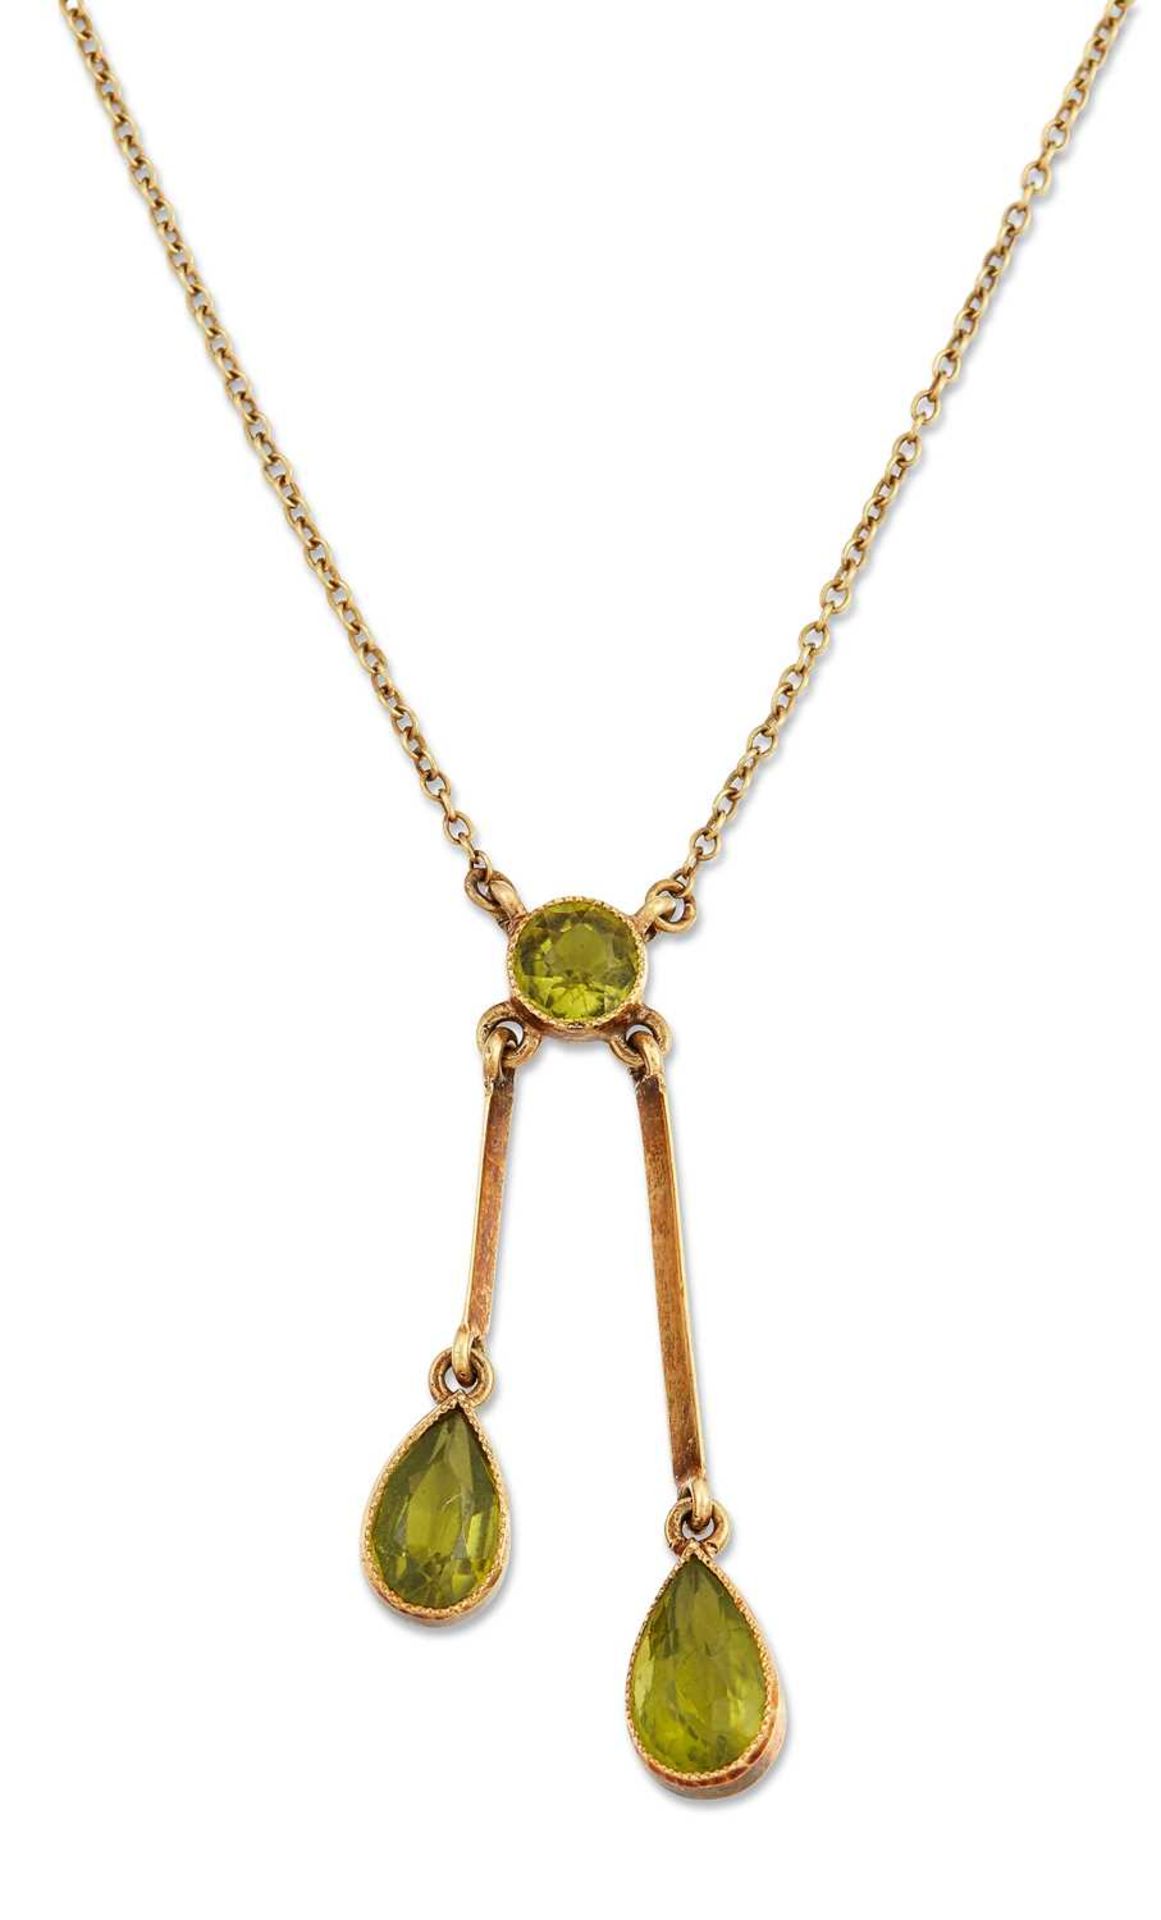 AN EARLY 20TH CENTURY PERIDOT NEGLIGEE PENDANT NECKLACE